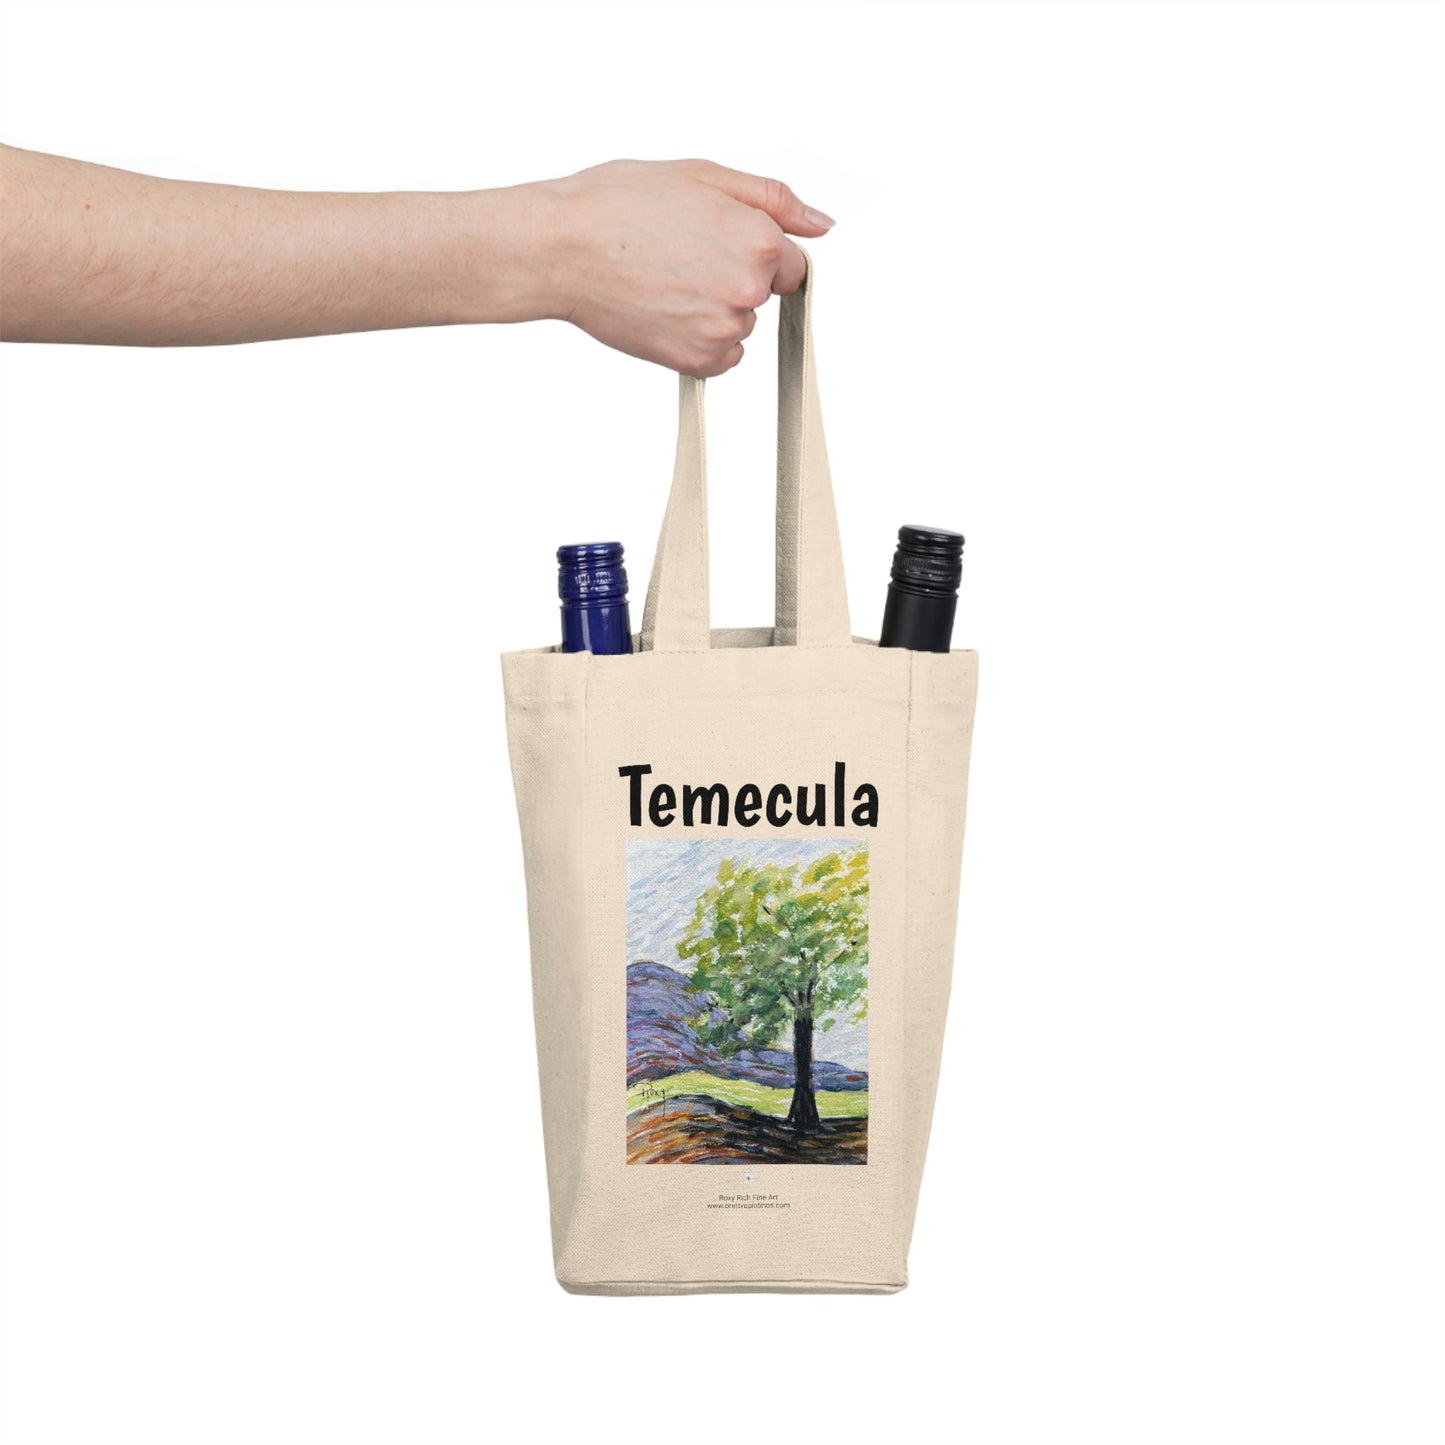 Temecula Double Wine Tote Bag featuring "The Tree" painting